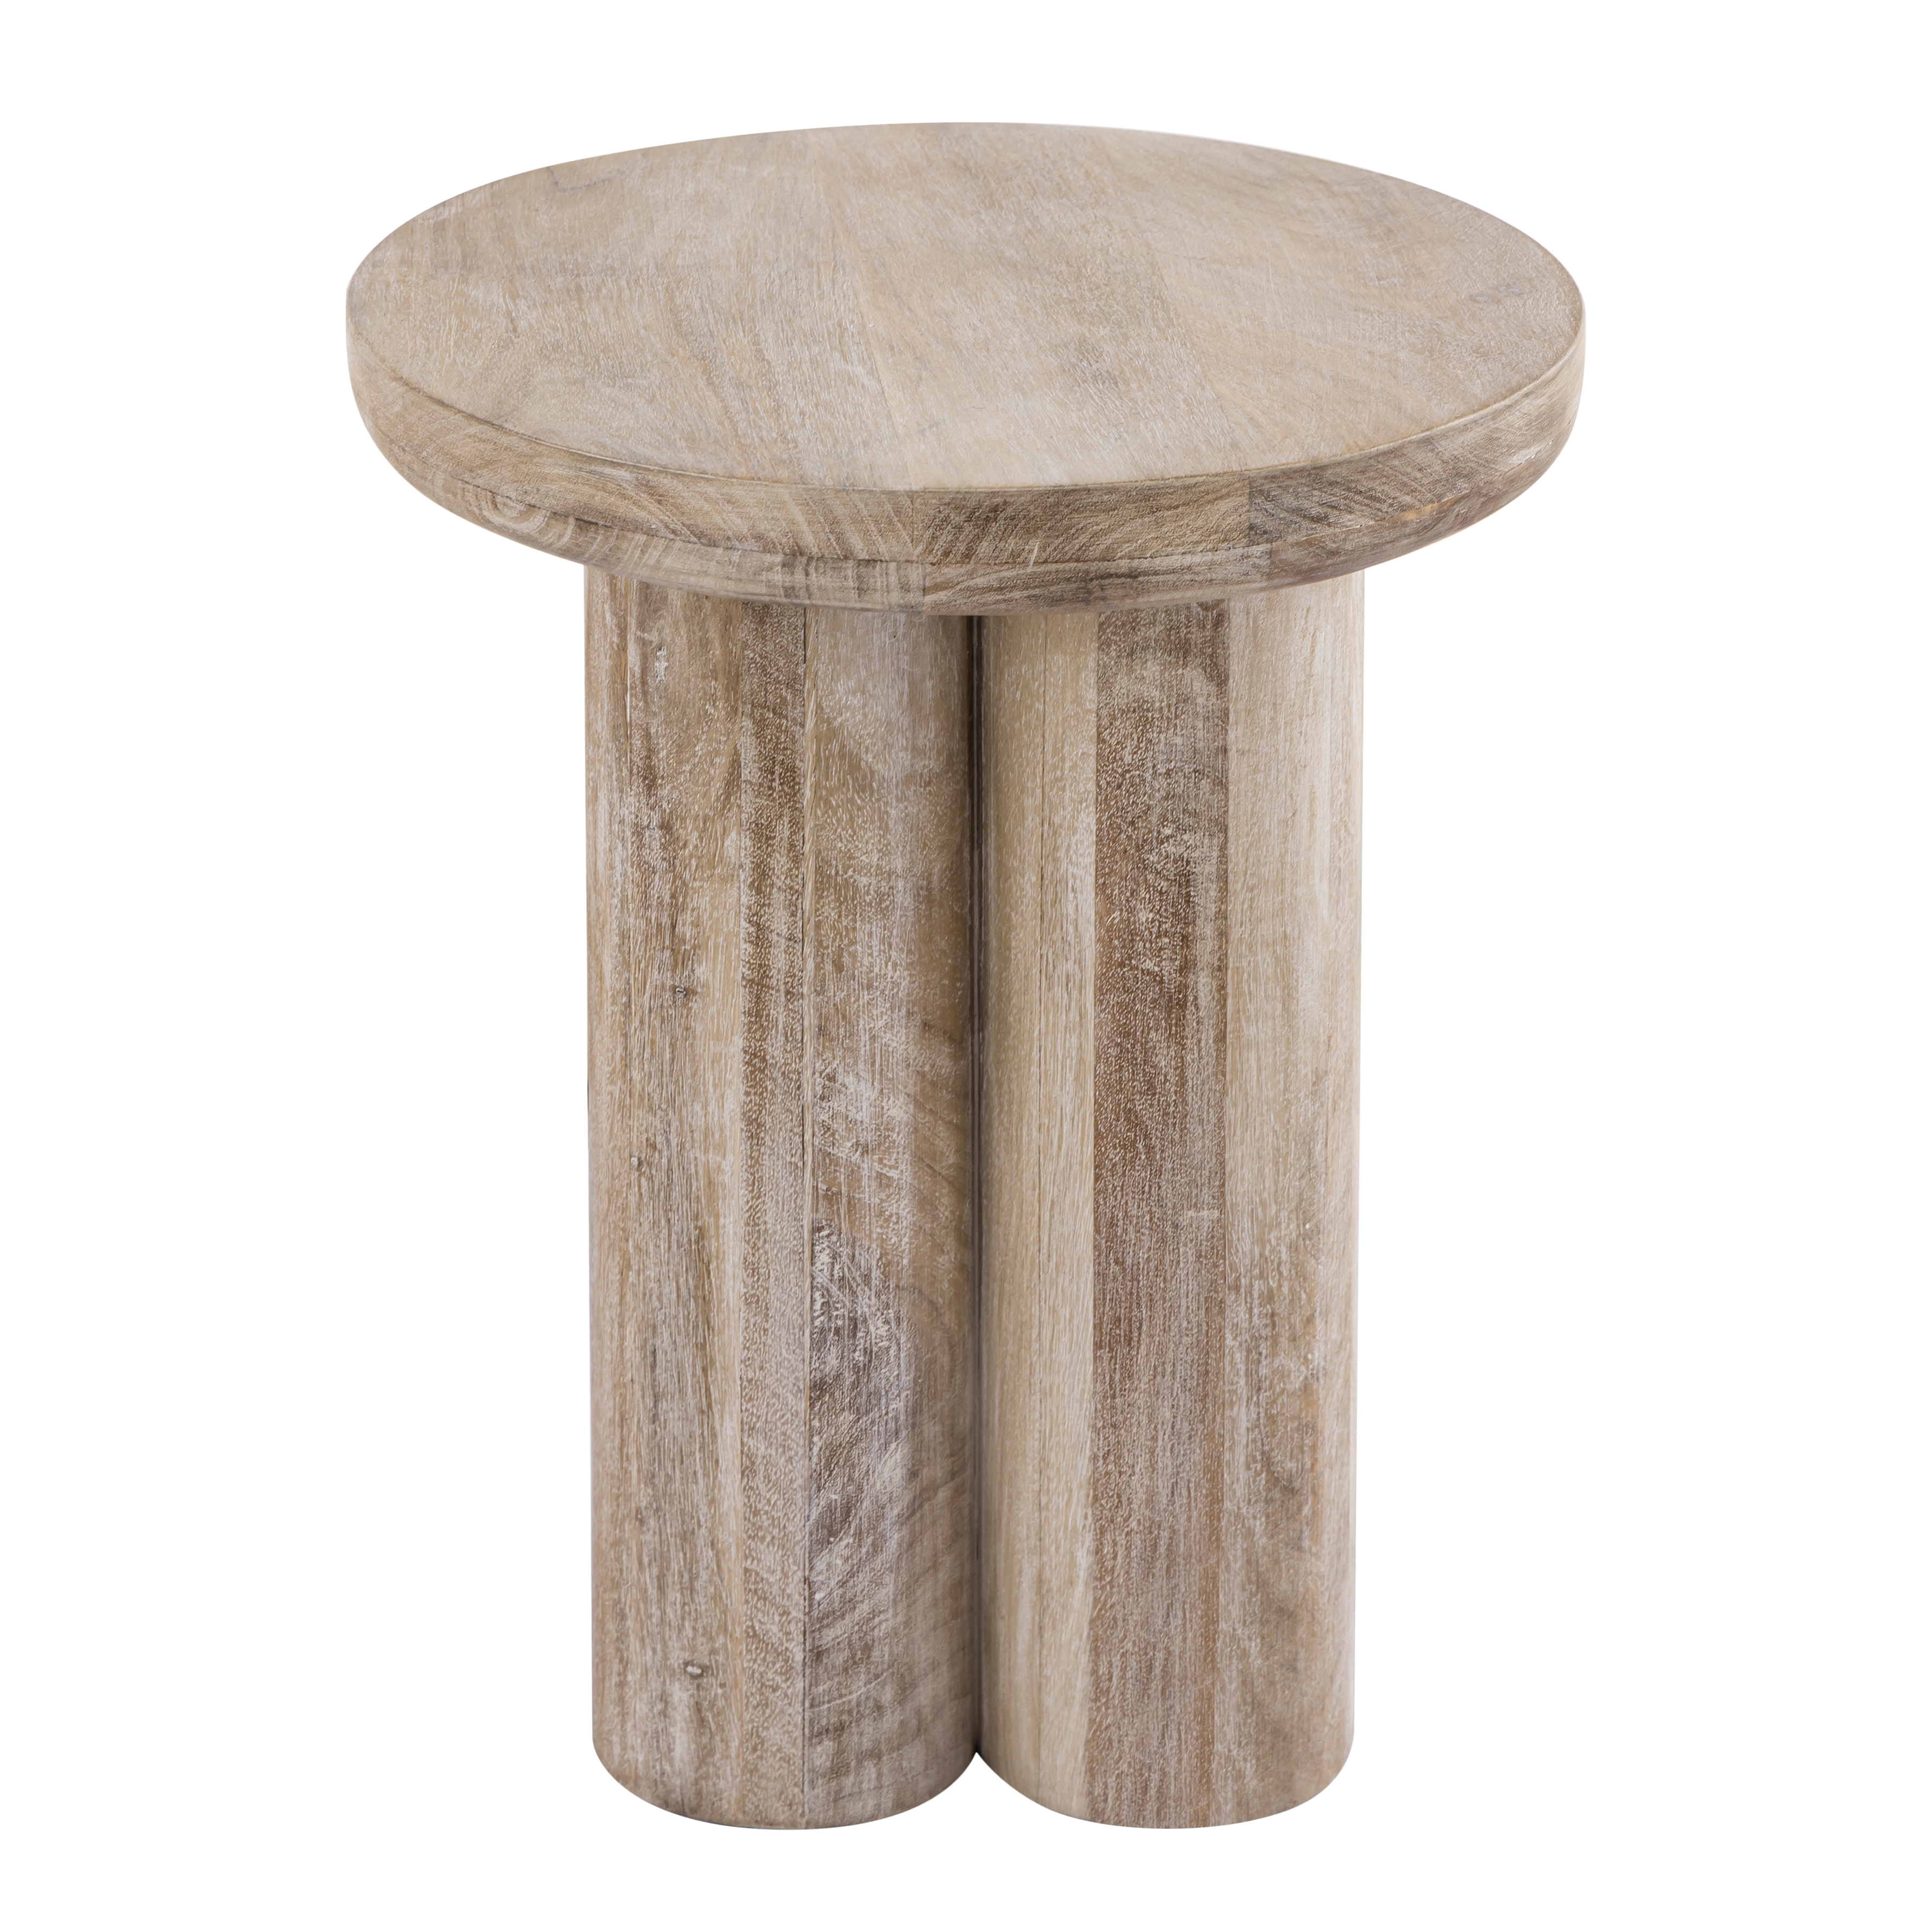 Morris Cerused Accent Table - Natural - Image 1